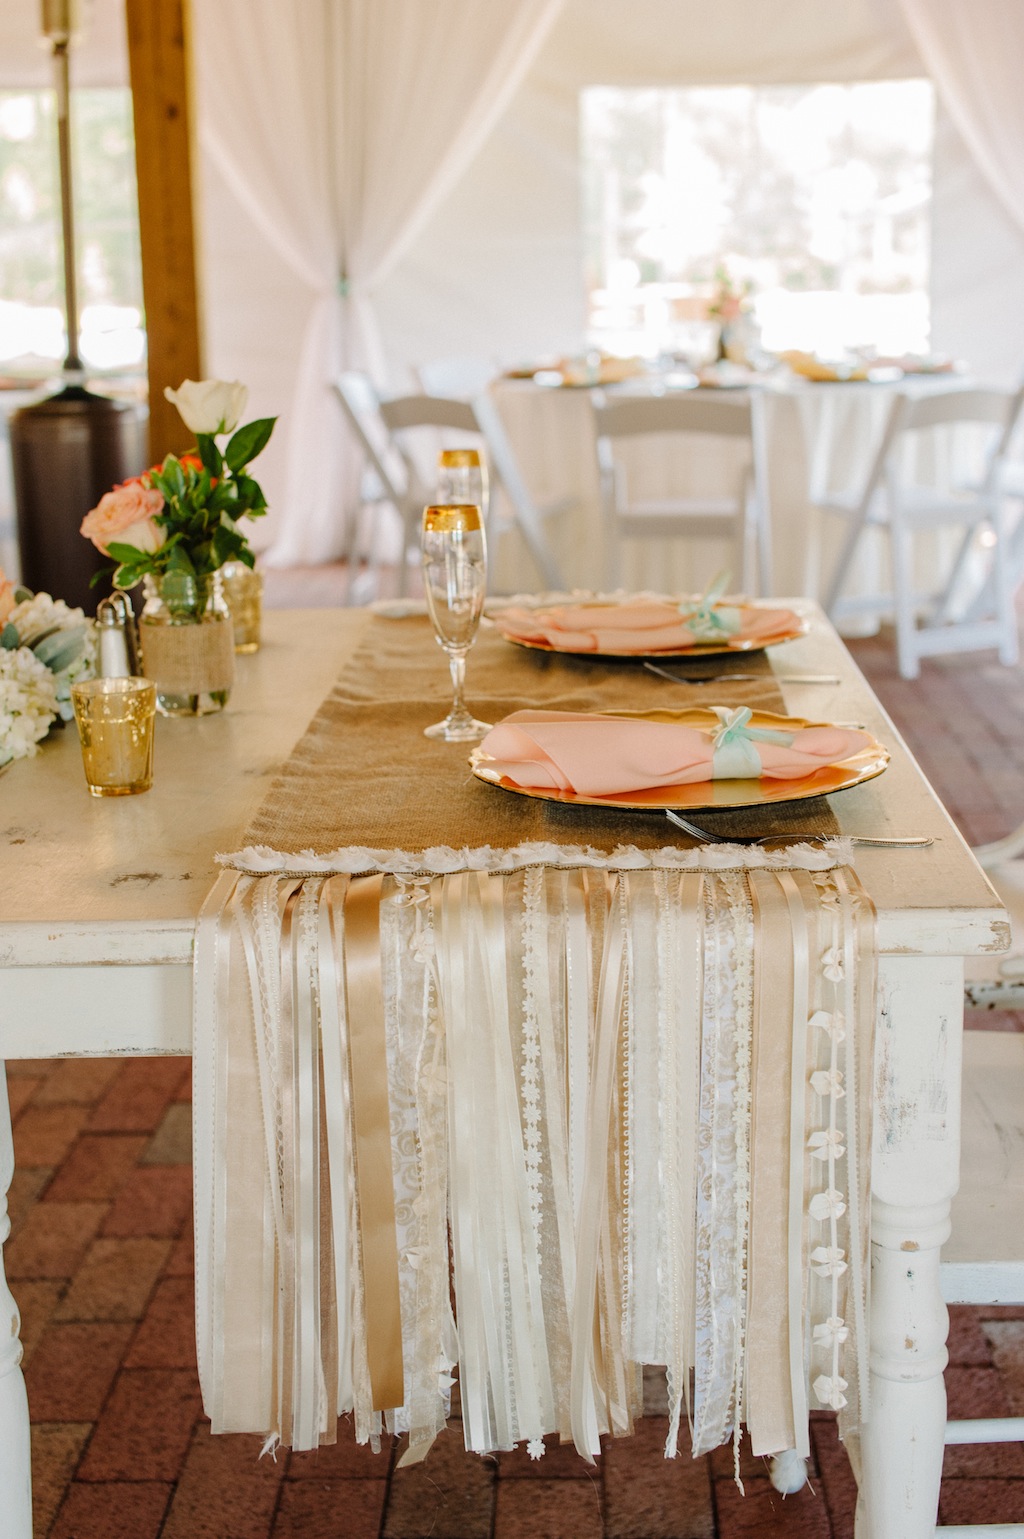 Mint, Coral and Yellow Rustic, Chic Cross Creek Ranch Wedding - Tampa Wedding Photographer 12-1 Photography (51)